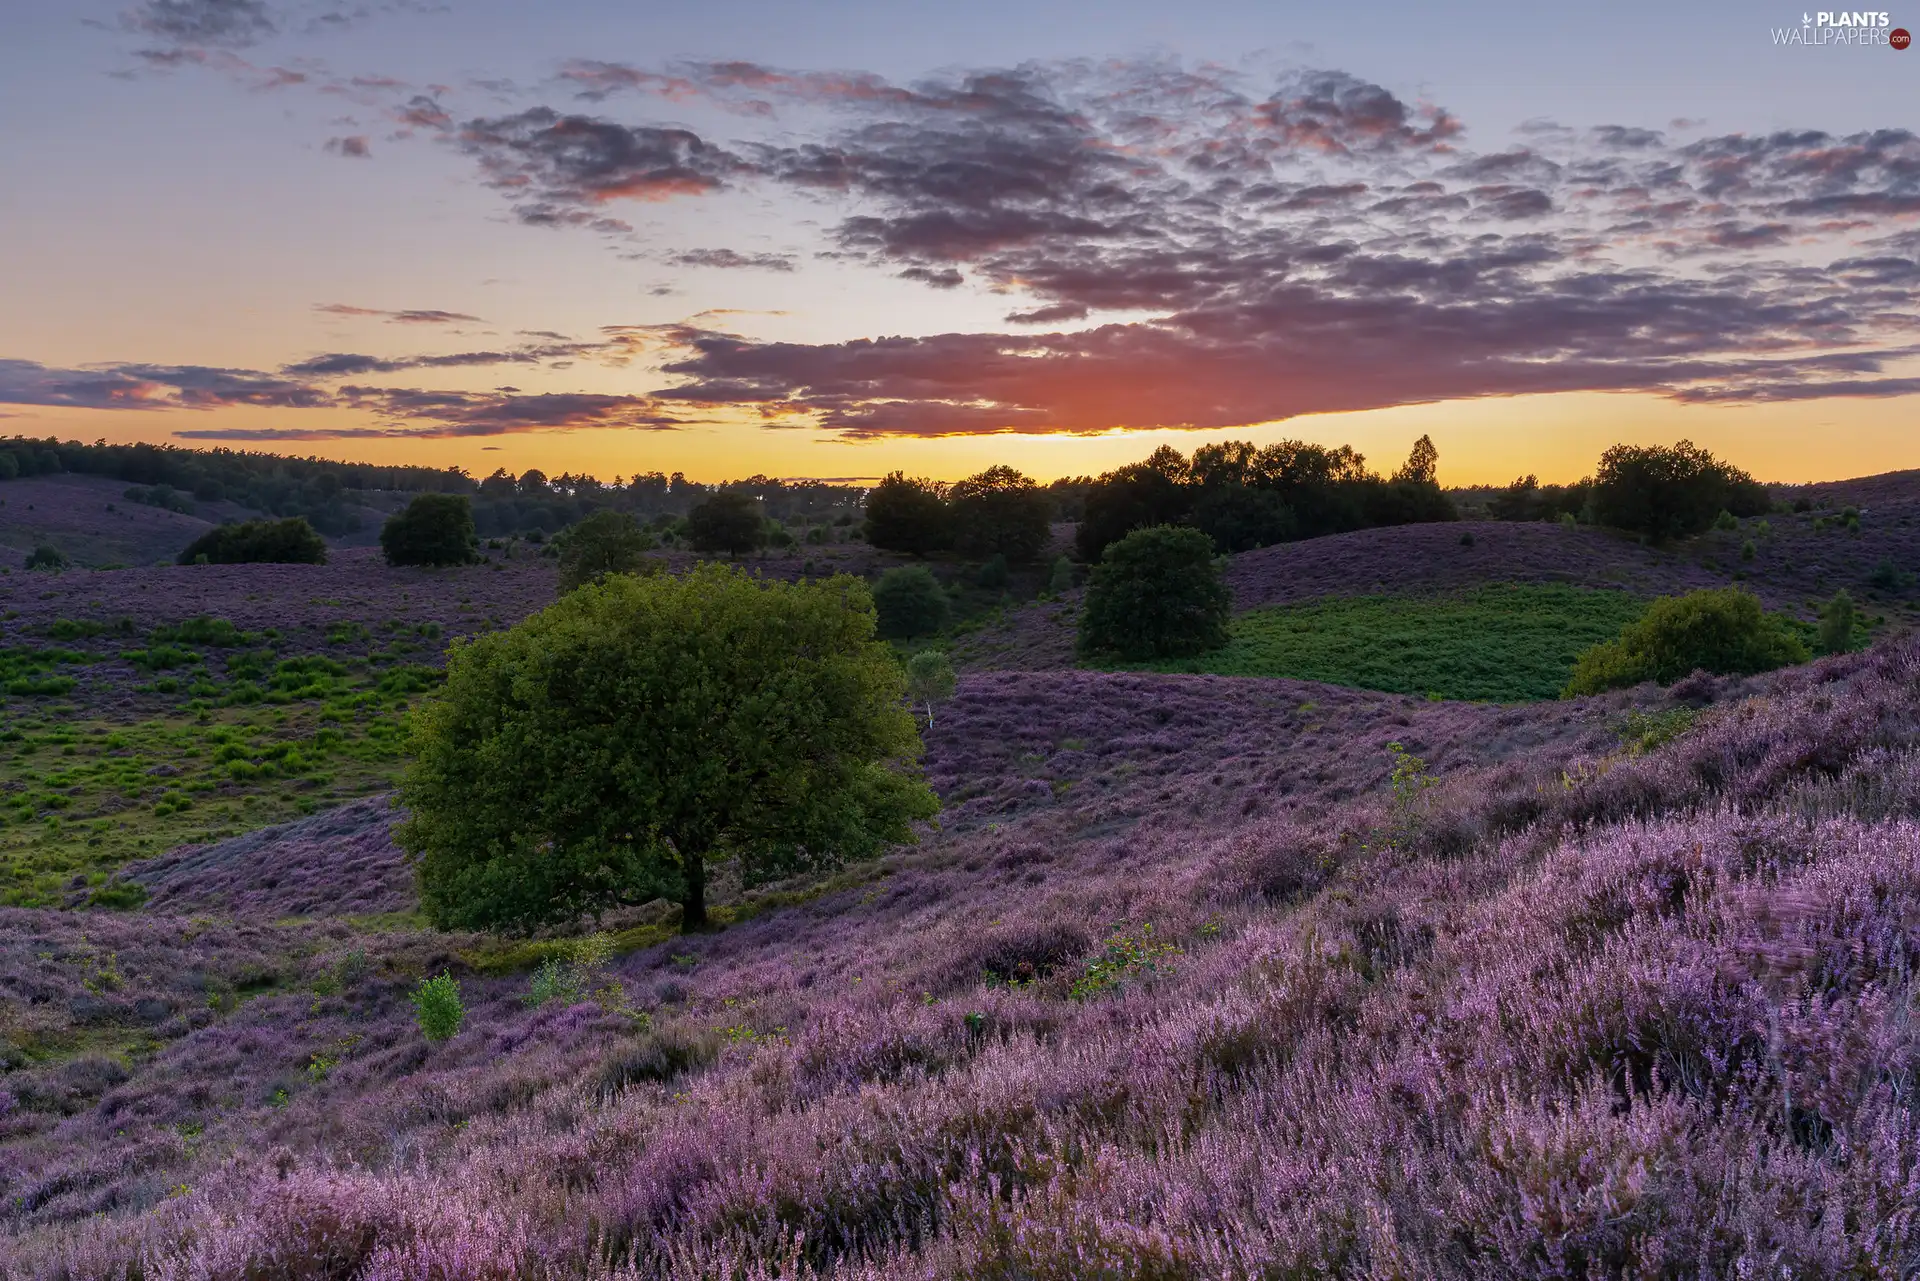 heathers, heath, trees, viewes, Province of Gelderland, Netherlands, Great Sunsets, Veluwezoom National Park, clouds